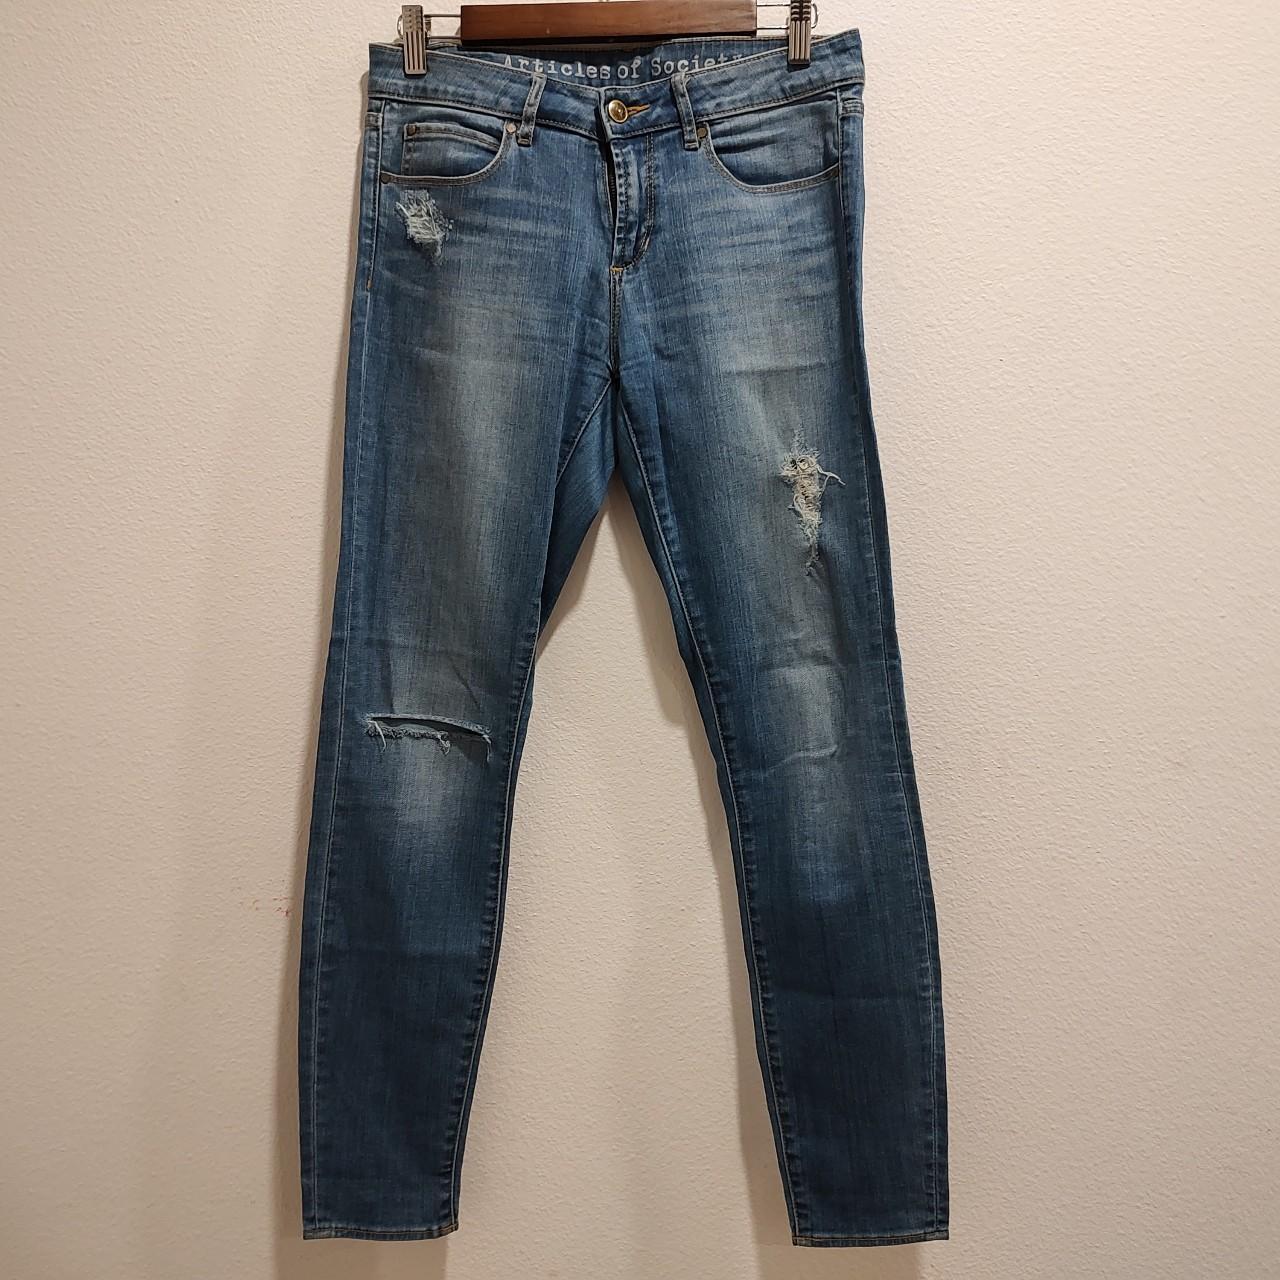 Articles of Society Women's Jeans